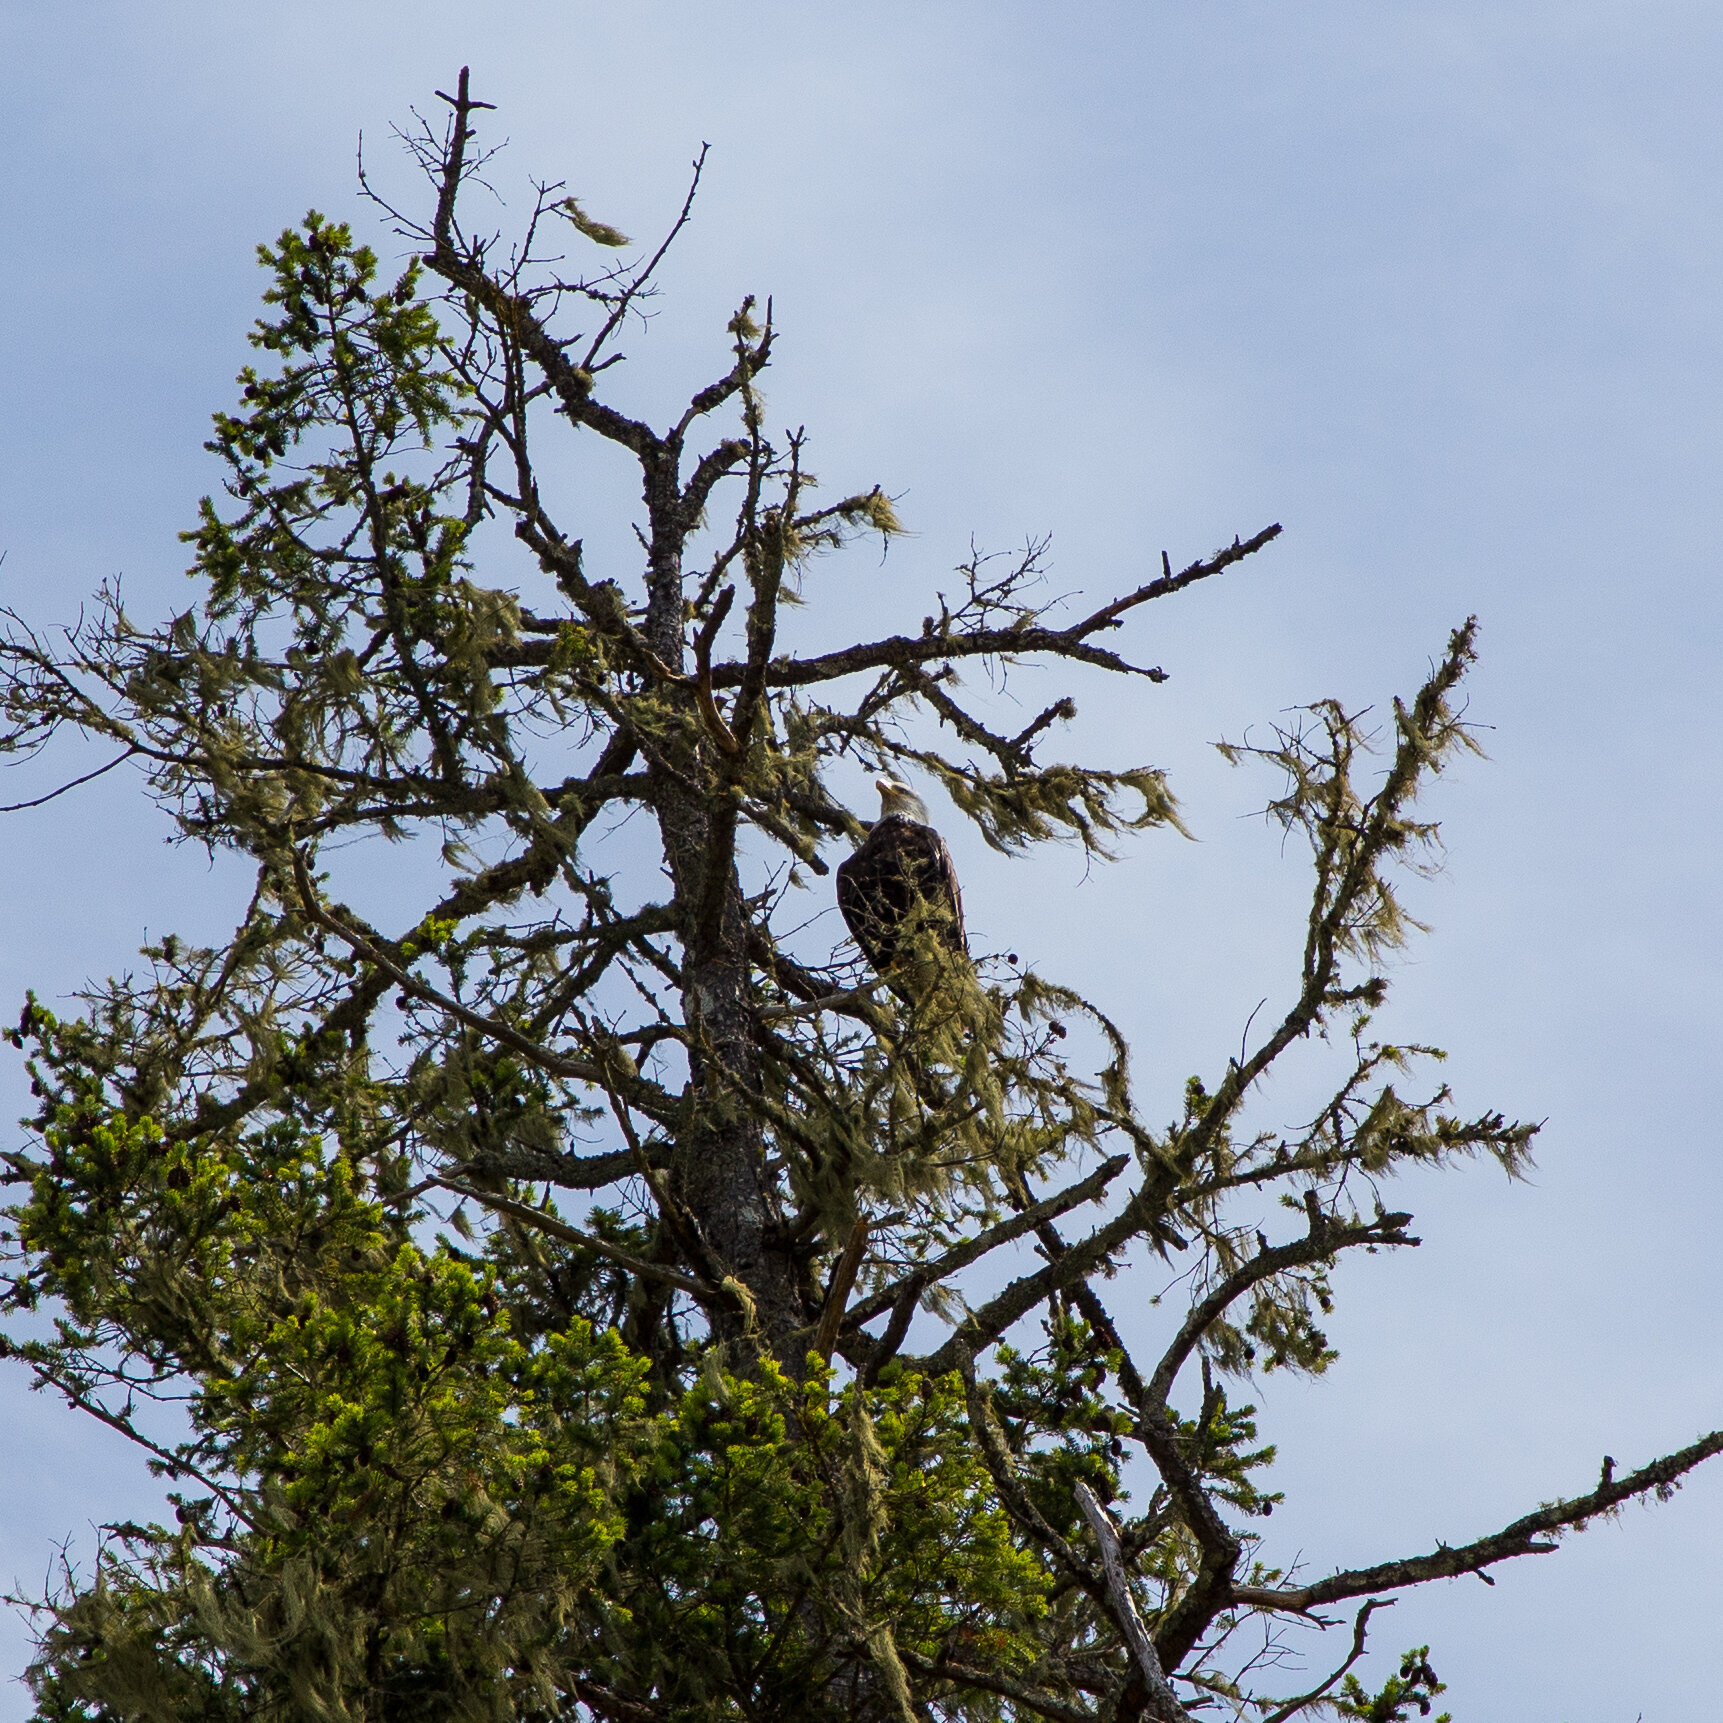  A bald eagle, keeping watch as we hiked underneath it’s perch. 